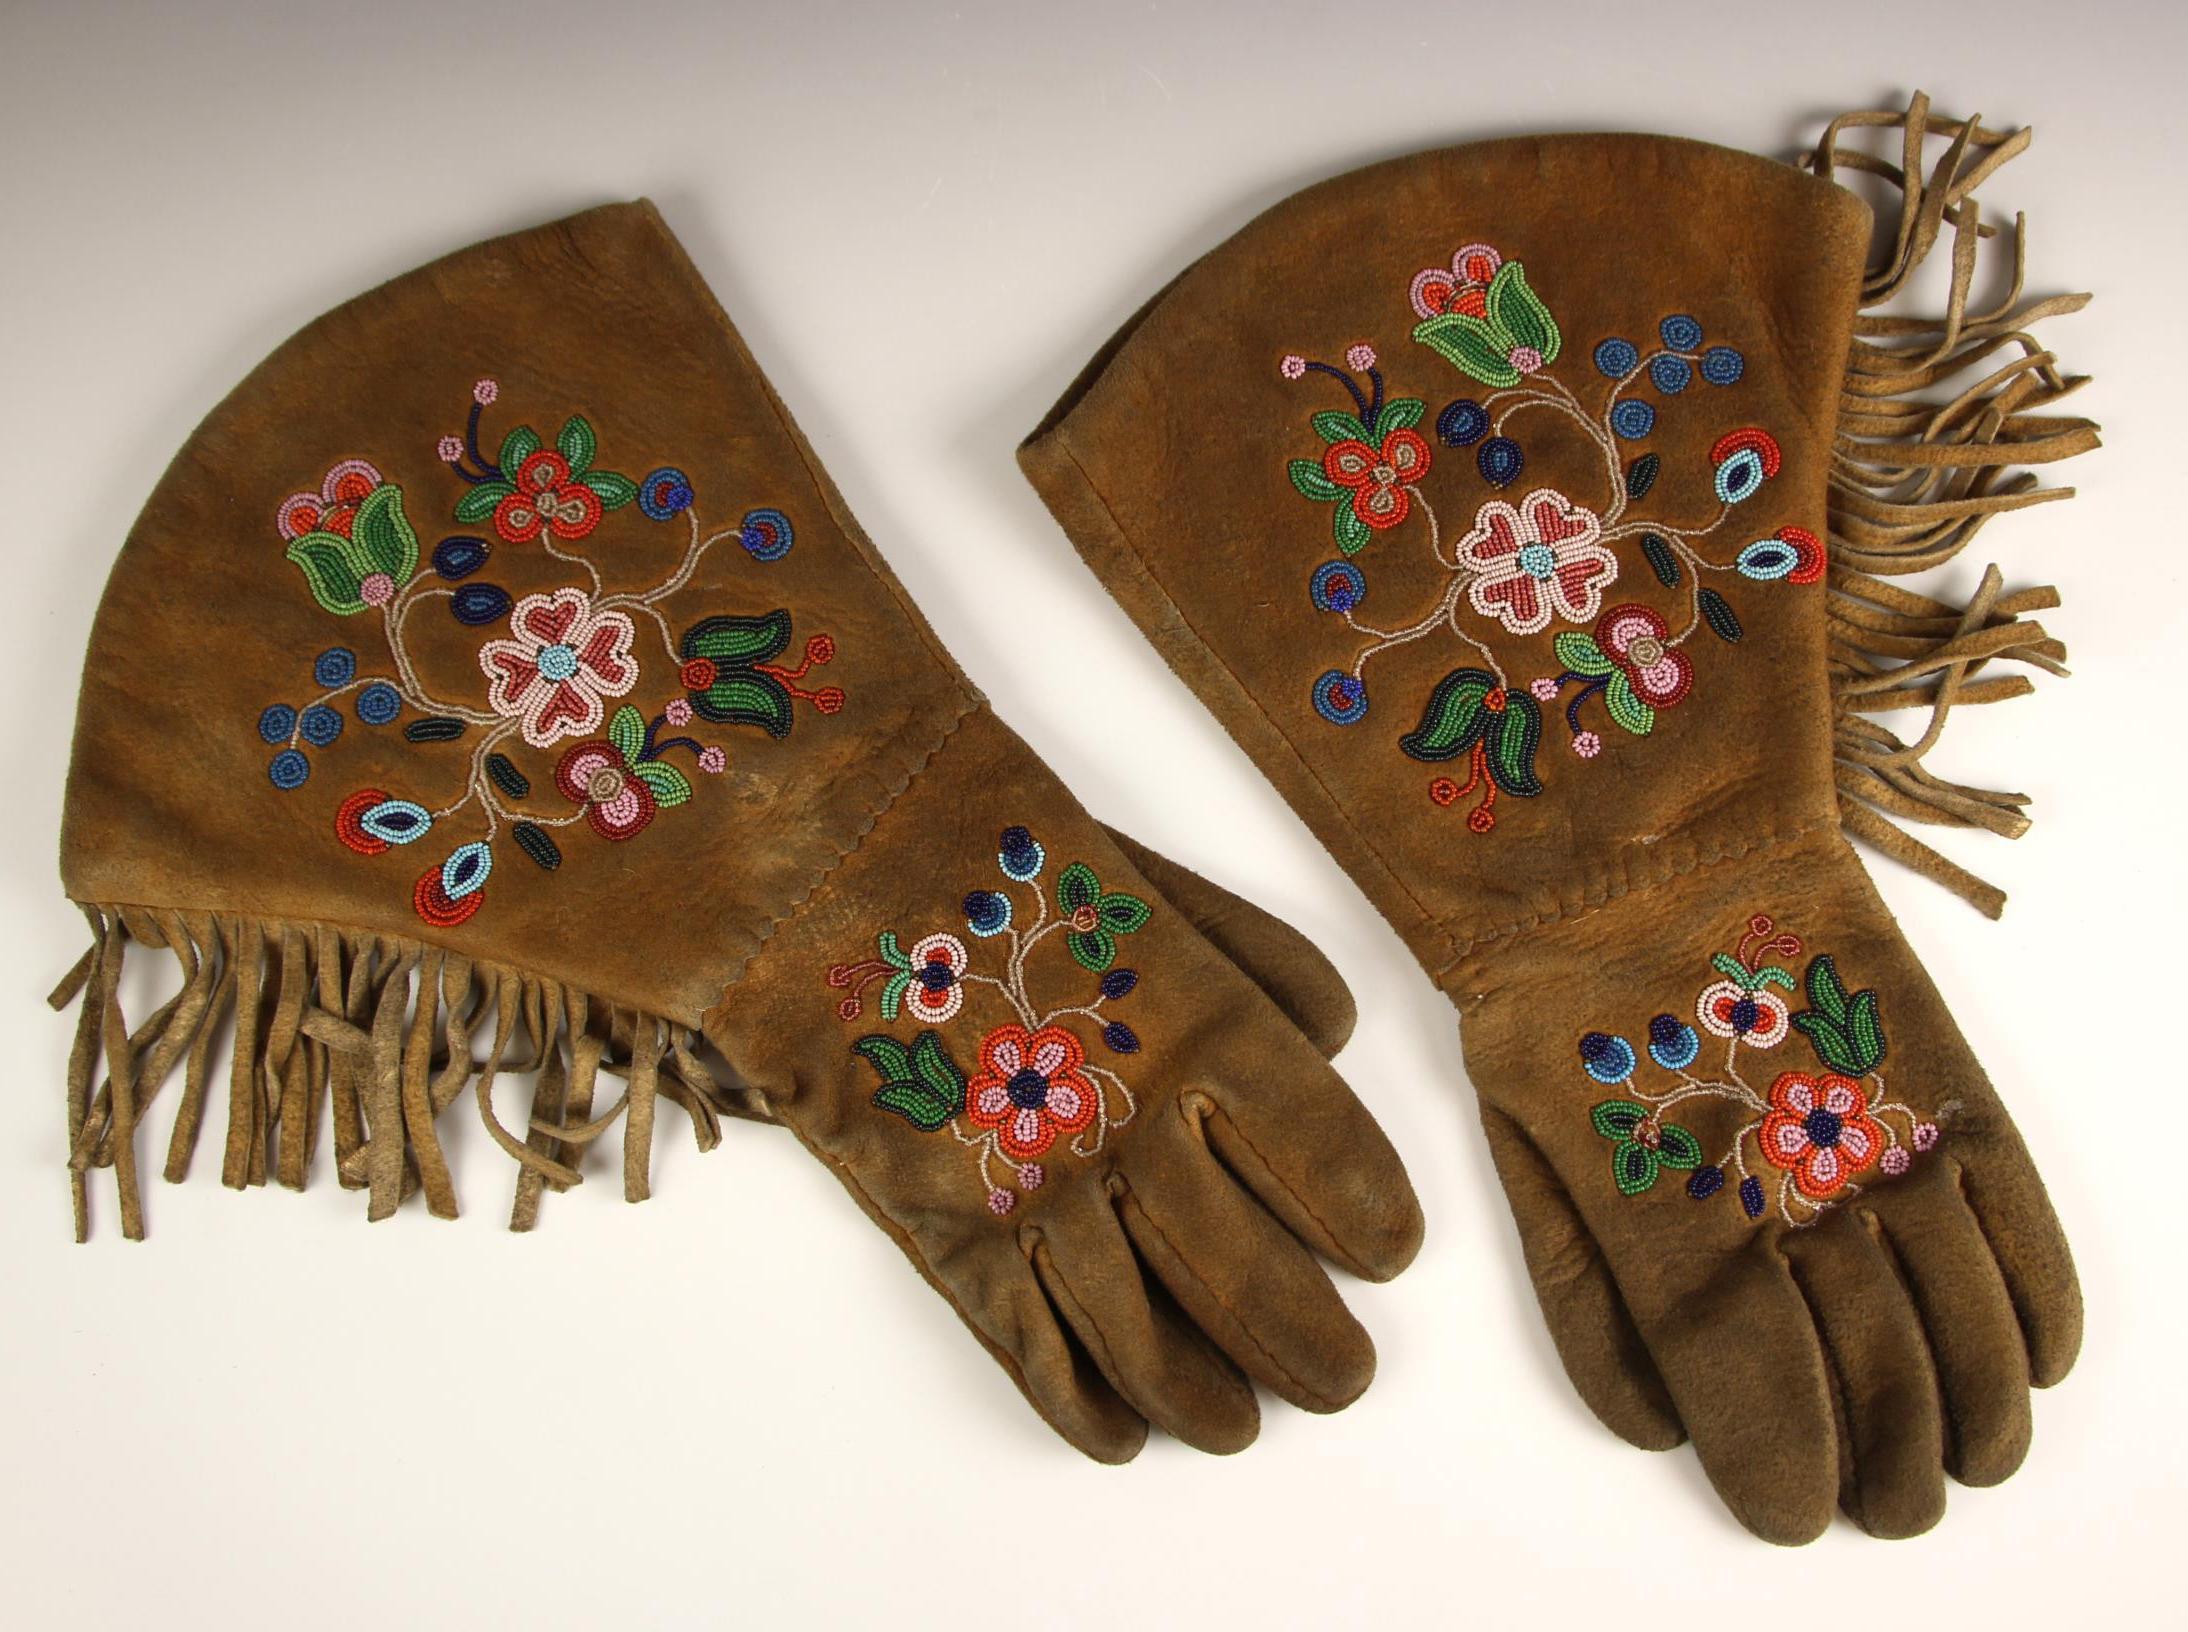 Native American Antique Beaded Gauntlets
Buck skin Gauntlets Finely beaded with floral design probably Cree
Period Early 20th century
 
